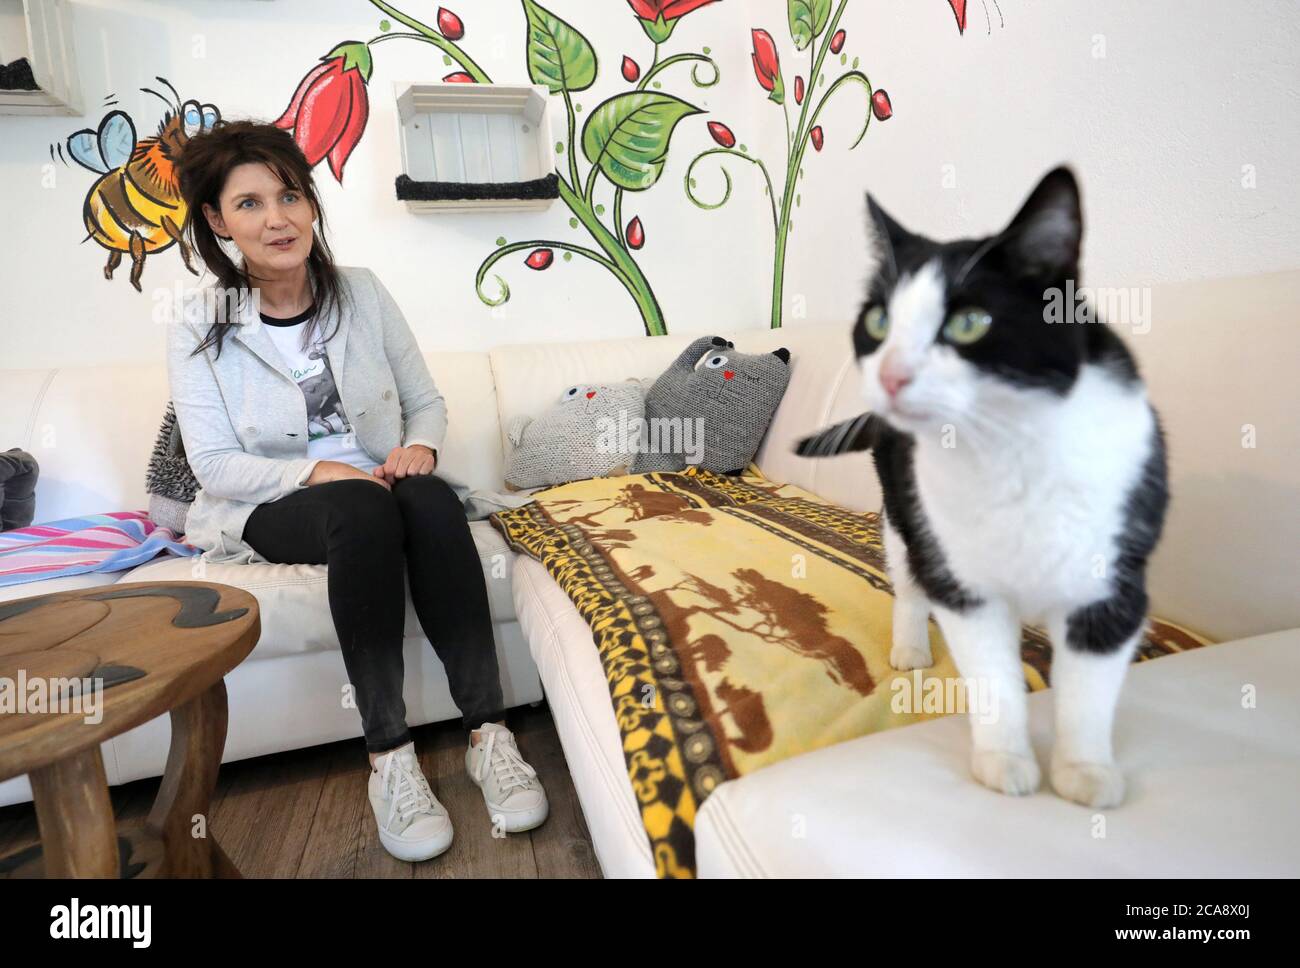 Neustrelitz, Germany. 14th July, 2020. Manuela Jeschke, founder of the private animal protection initiative Katzenparadies Neustrelitz, sits with a cat in the 'cat living room'. More than 50 velvet paws currently live in the cat paradise. There are no bars here for healthy, adult and neutered animals. You can freely choose between the cat-living rooms in the house and the garden, which looks like a miniature playground for children. Only those who are new, sick or too small for outside live in enclosures for the time being. Credit: Bernd Wüstneck/dpa-Zentralbild/ZB/dpa/Alamy Live News Stock Photo